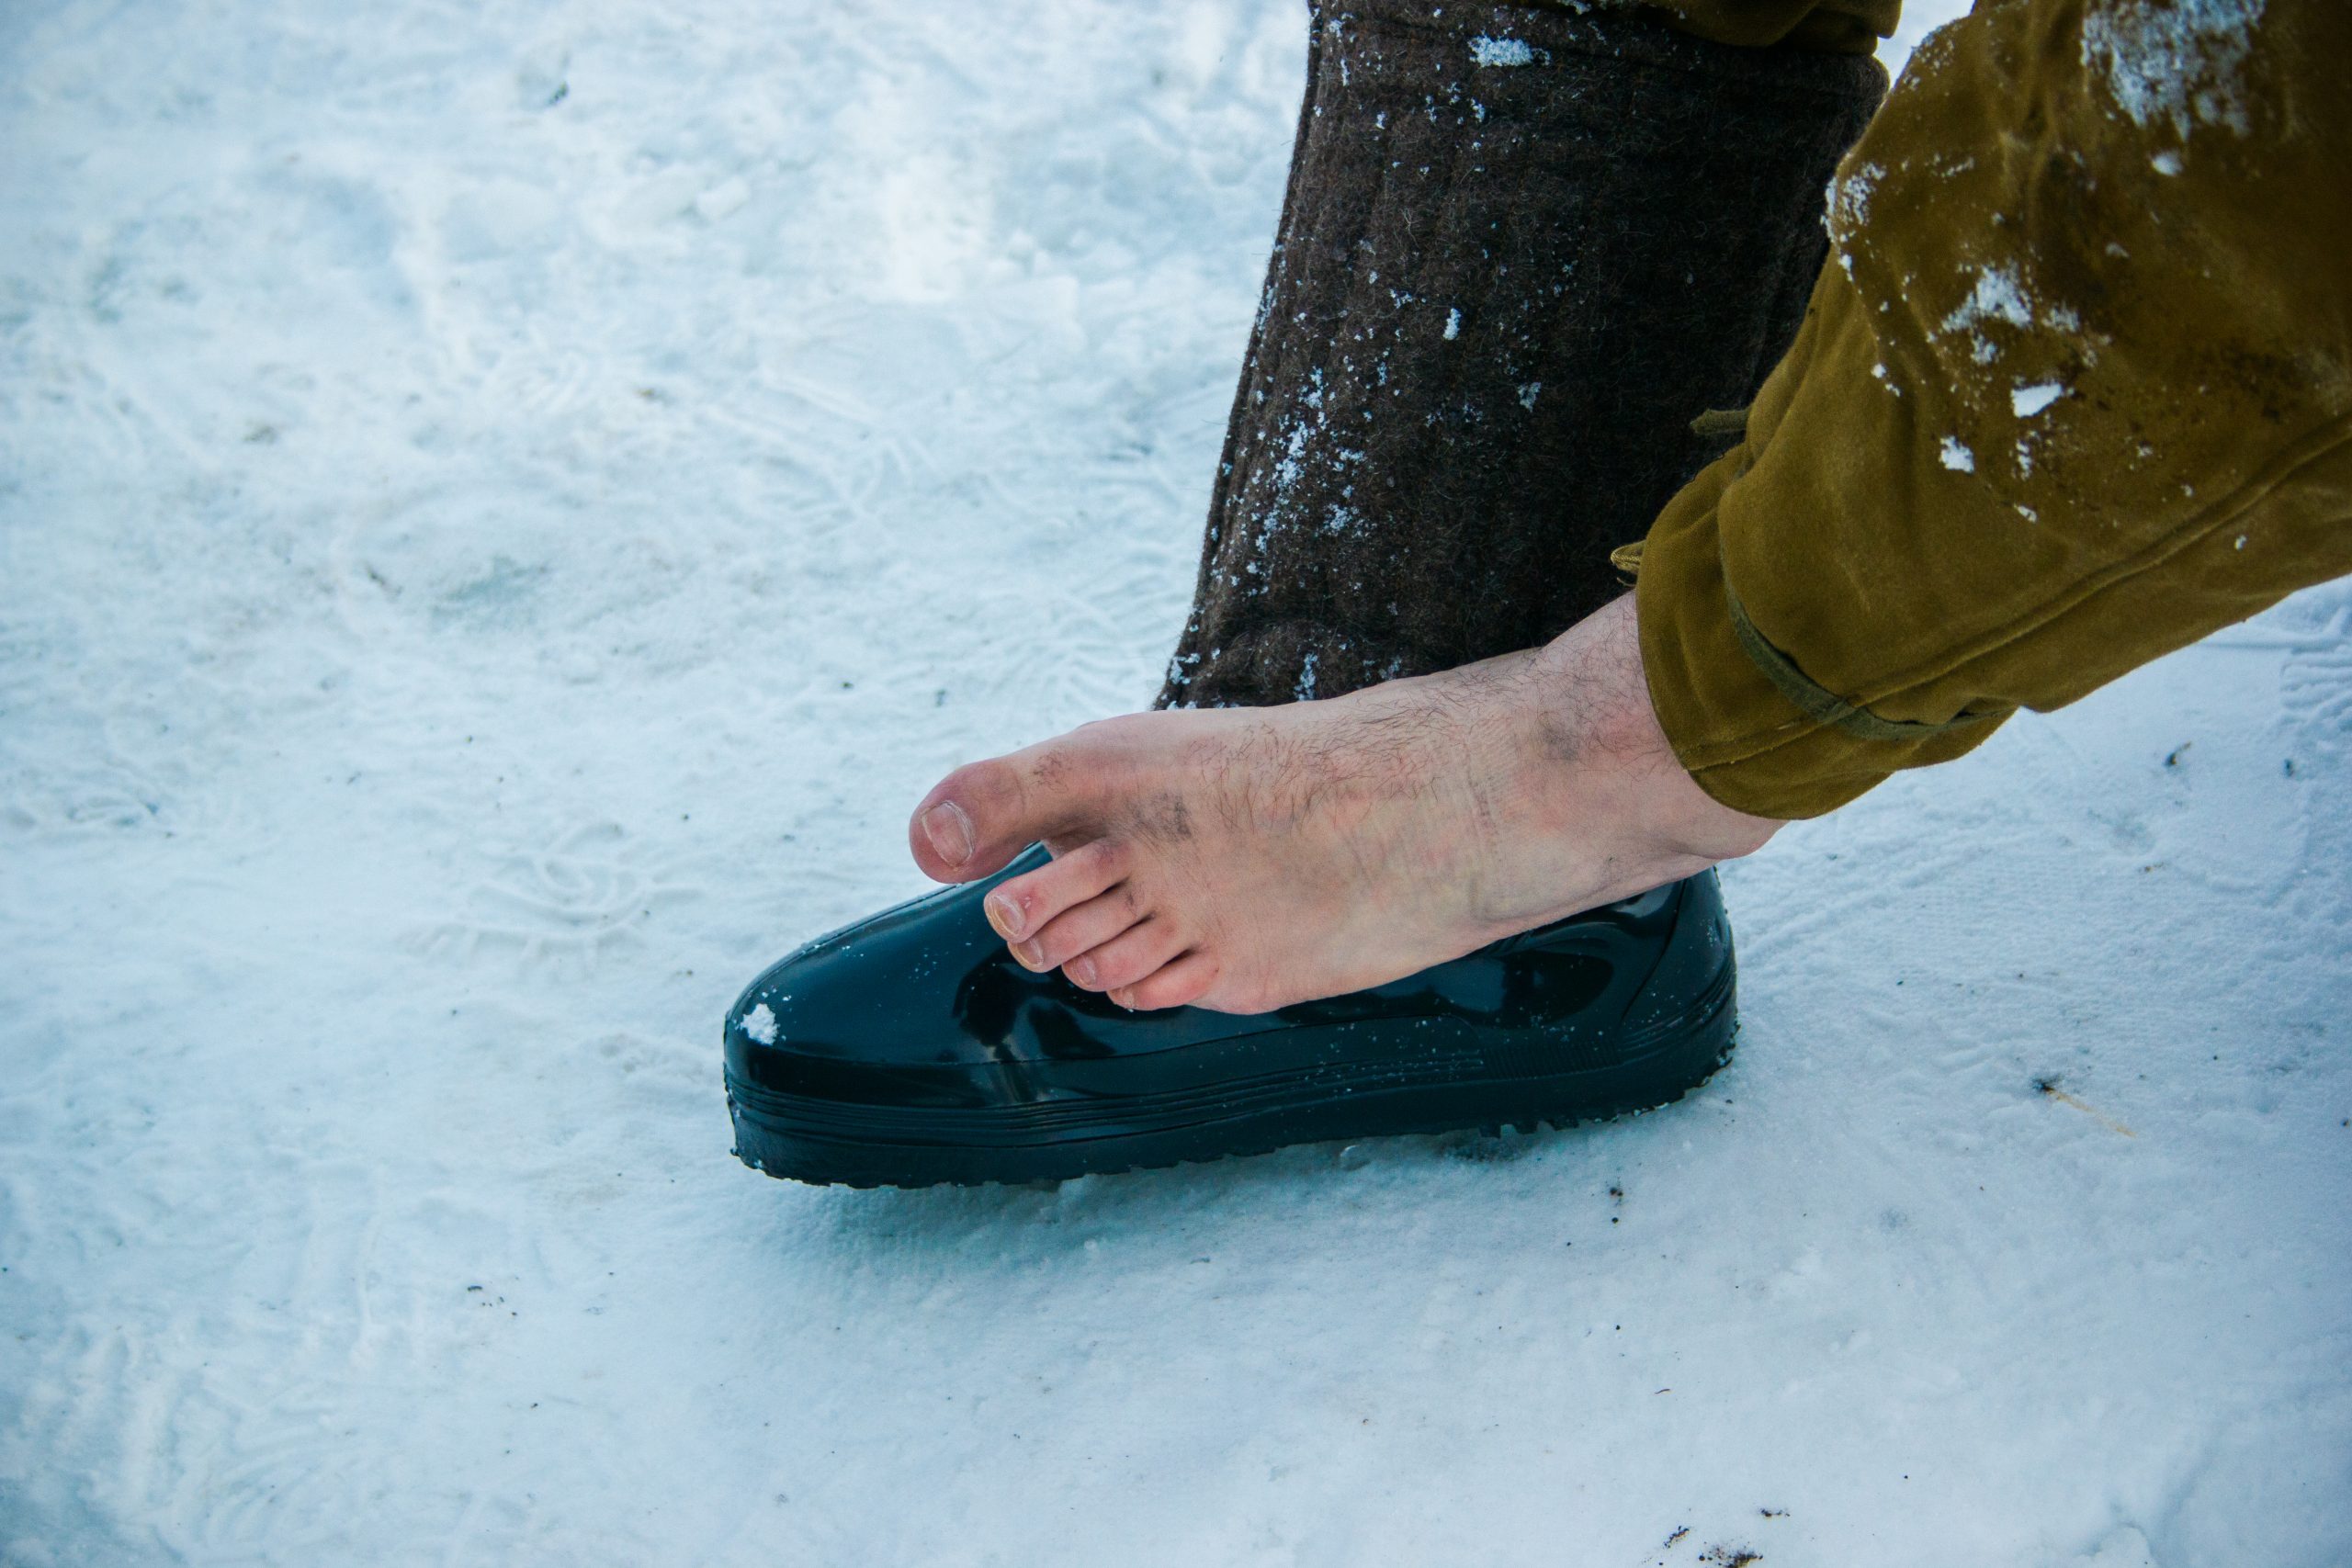 Treating frostbite on the feet and toes